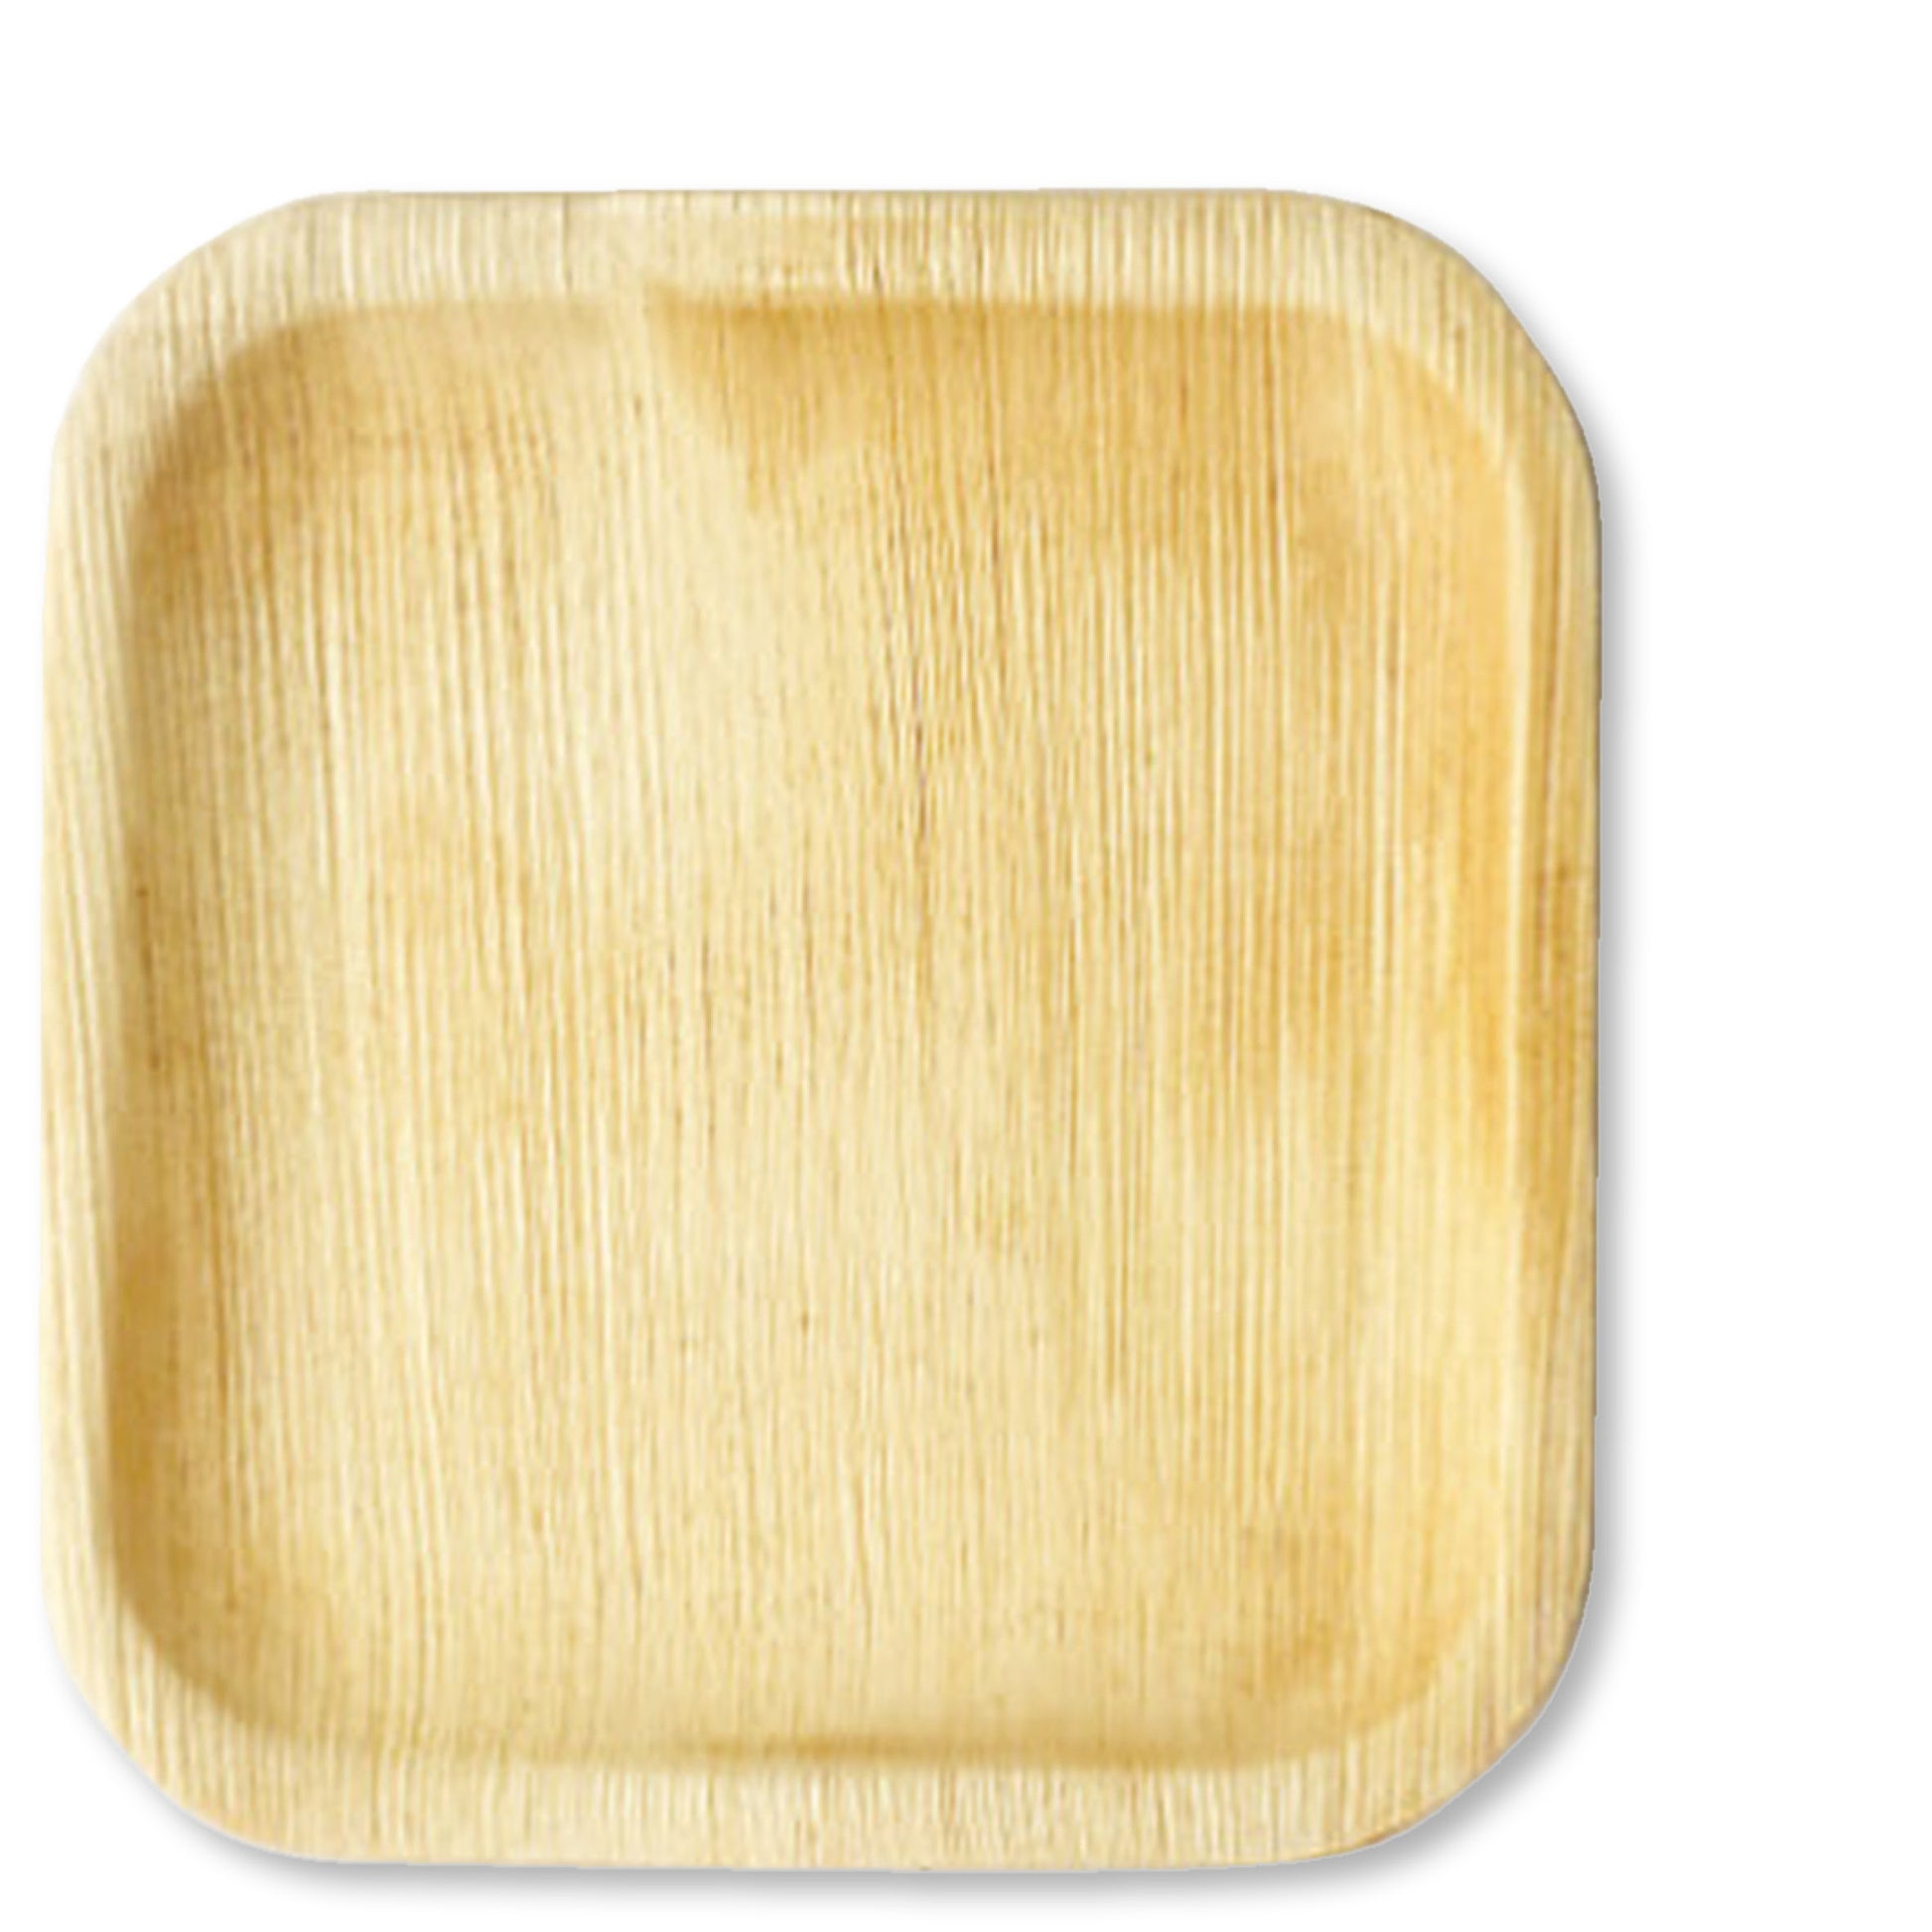 Disposable Stylish  SQUARE Palm Leaf Plates are a unique alternative to other disposable tableware on the market.  Chemical-free / Non-toxic• Biodegradable / Compostable• Microwave Safe• Oven Safe• Refrigerator safe. From Palm Leaf Plates NZ